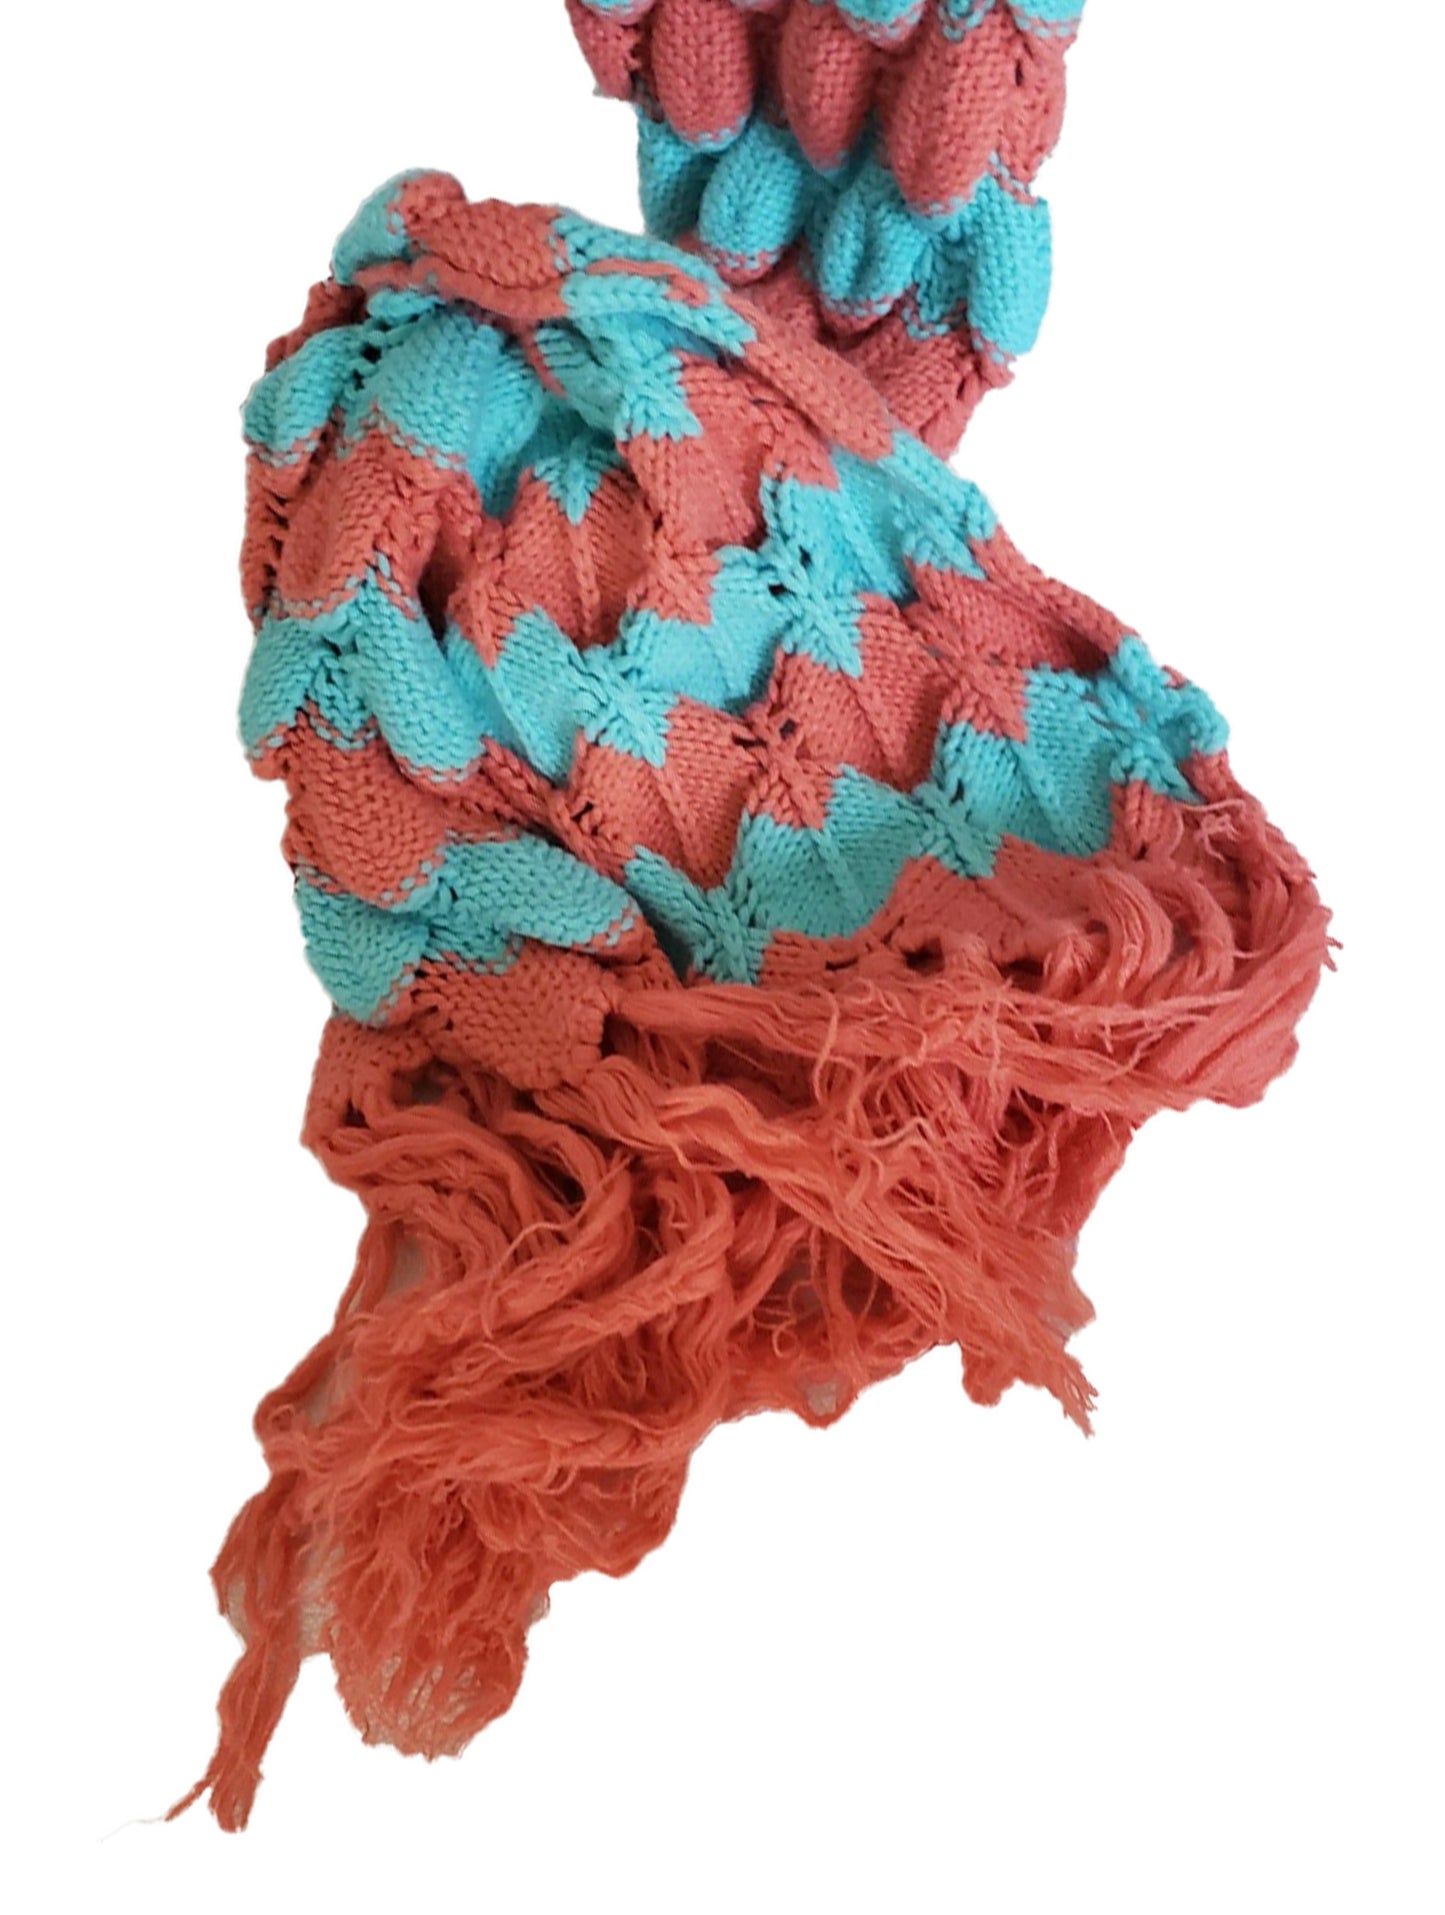 Crochet Adult/Teens Mermaid Blanket with  Fringe Tail Coral-Turquois